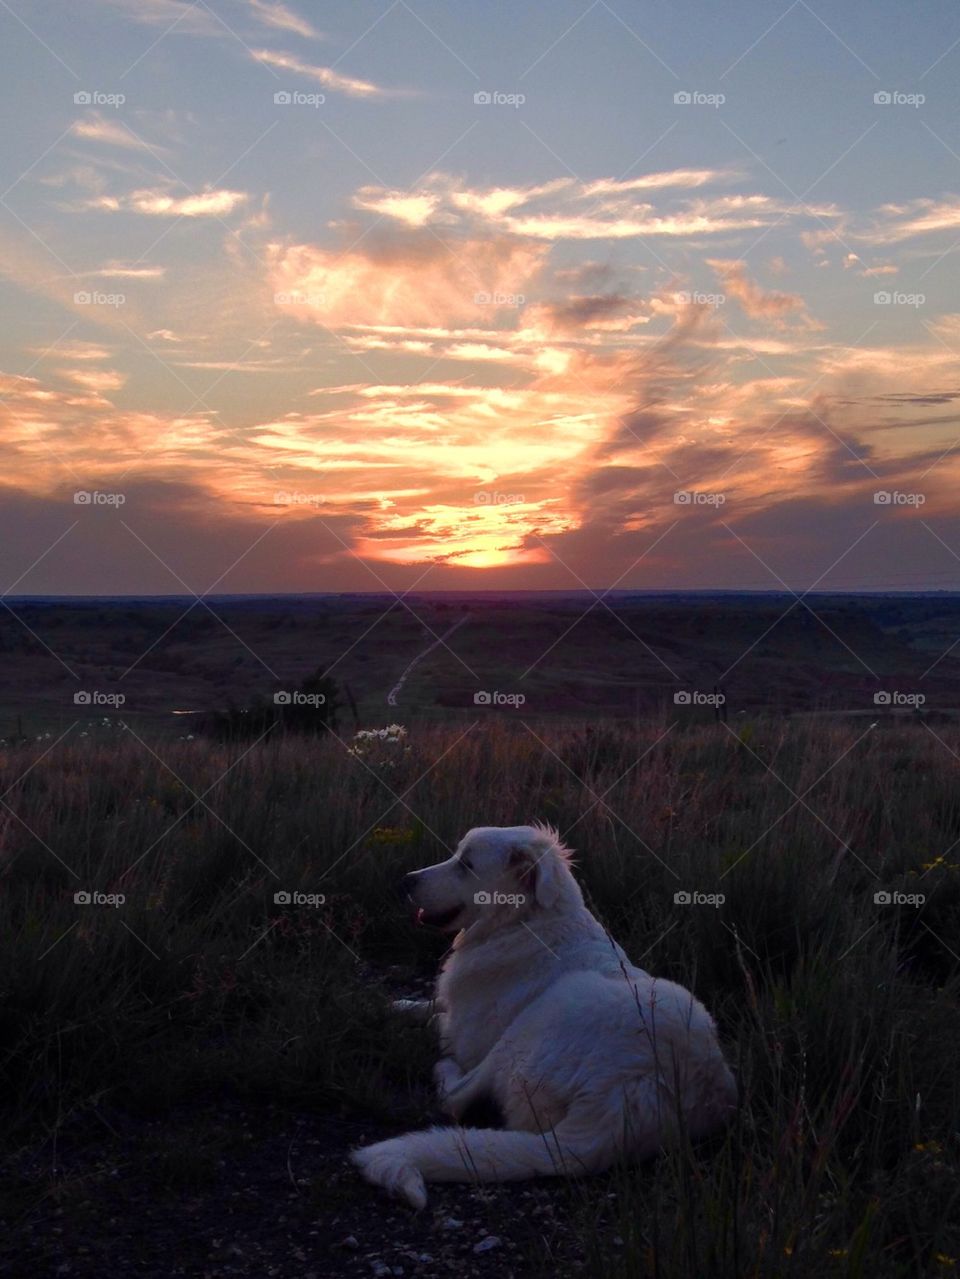 Great Pyrenees at Sunset